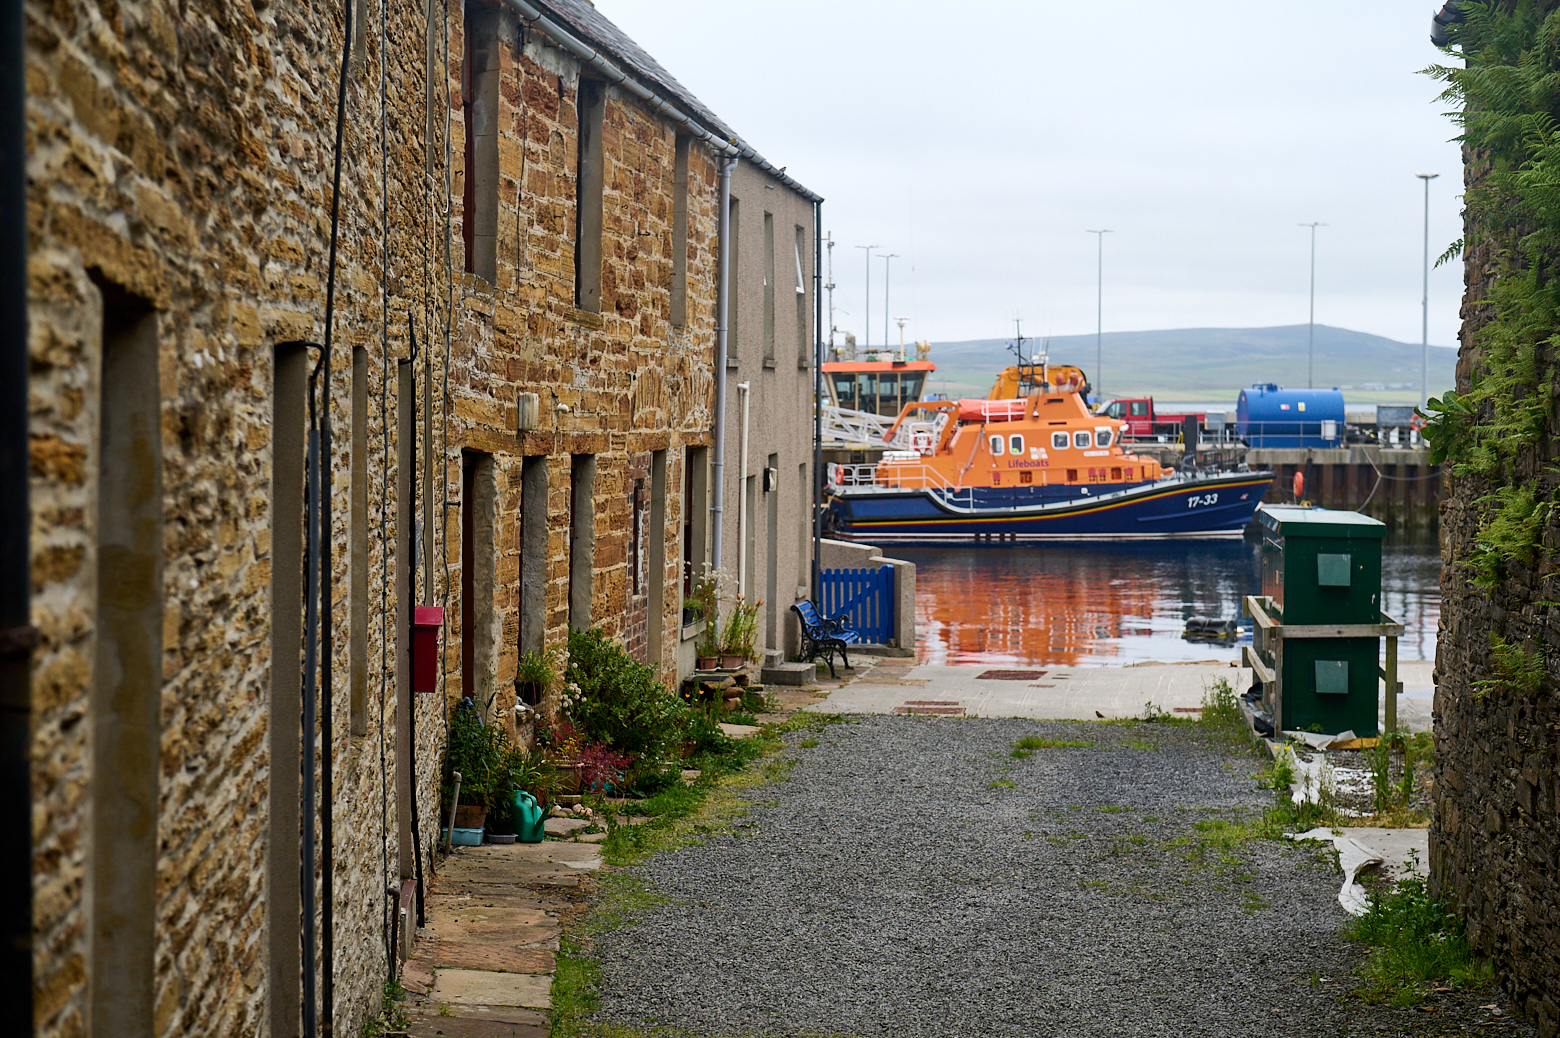 Taking a walk through Stromness, the lovely town in Orkney, Scotland.